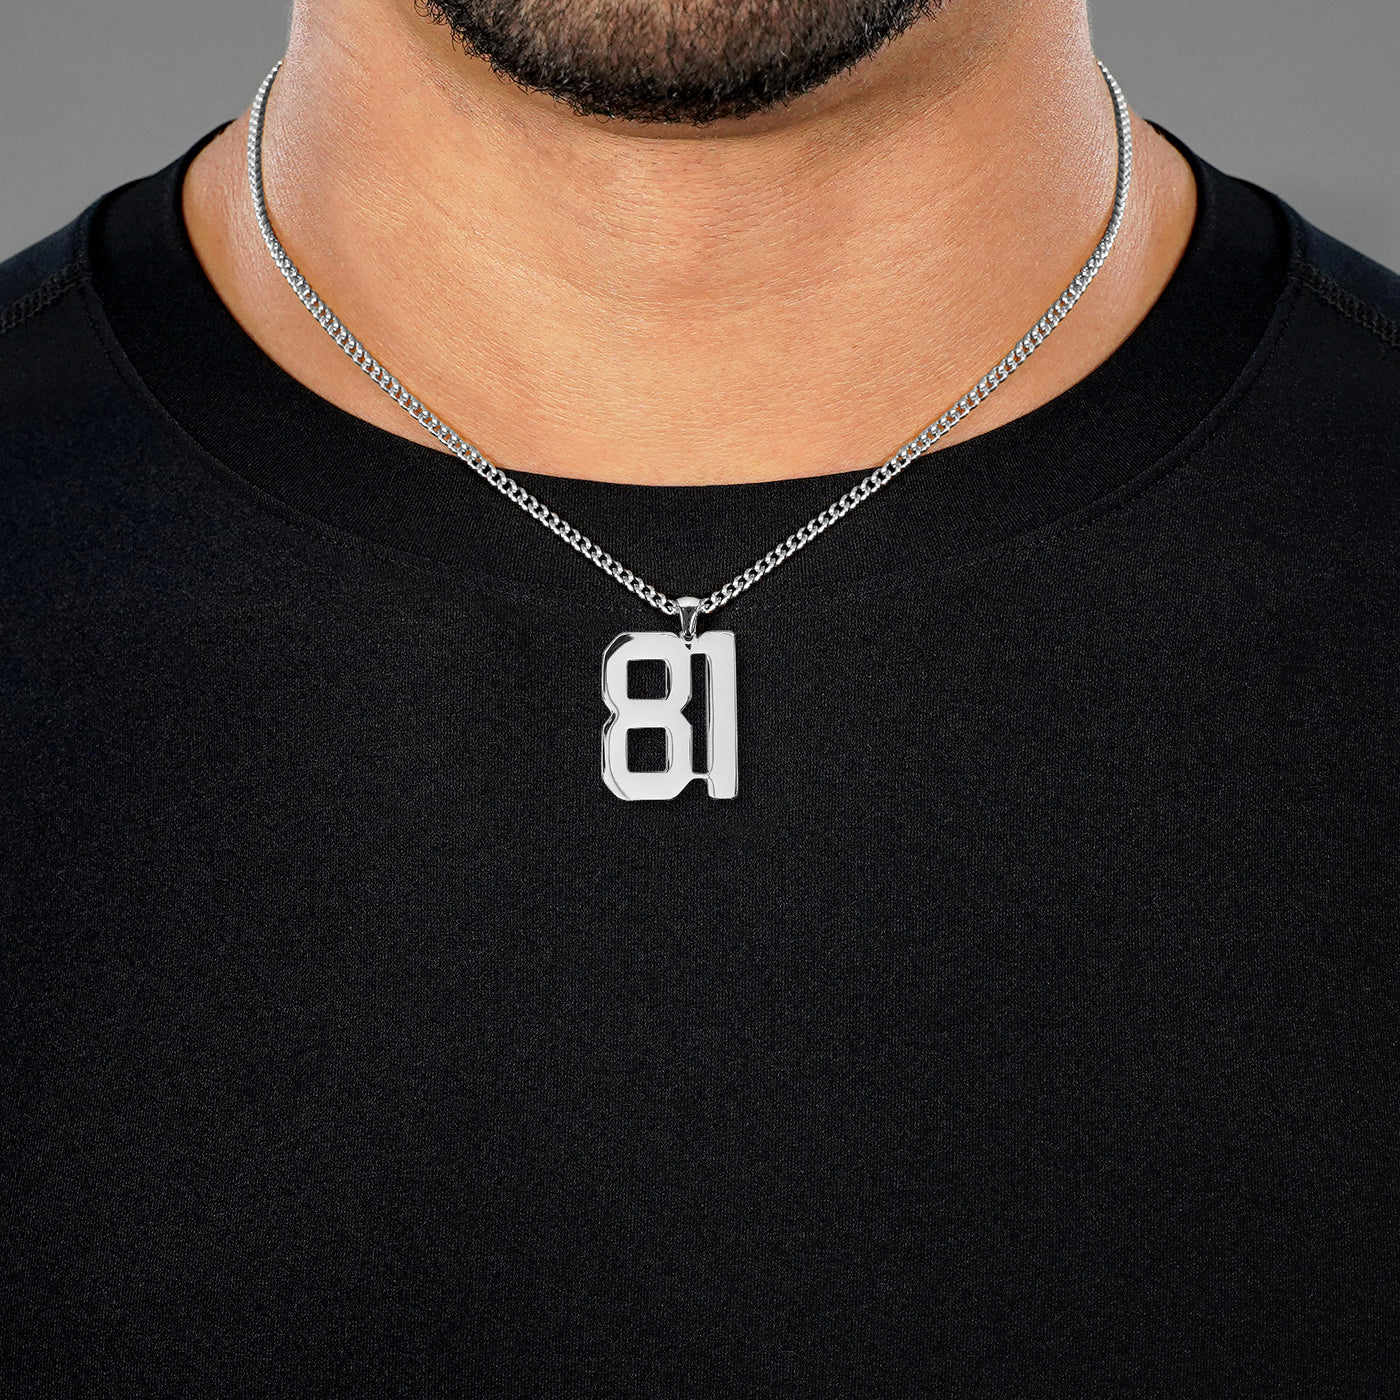 81 Number Pendant with Chain Necklace - Stainless Steel